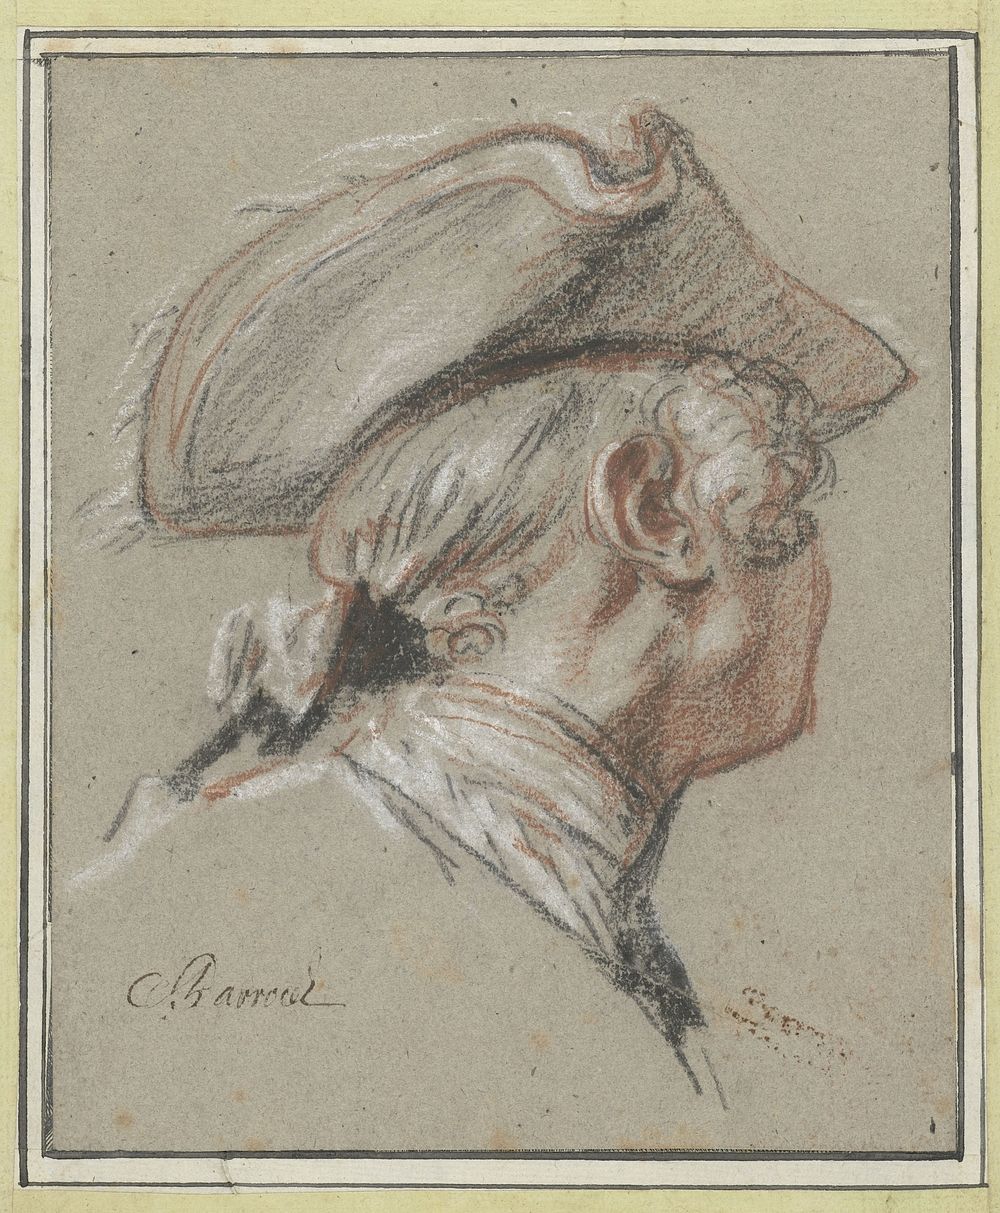 Study of a Head (c. 1737) by Charles Parrocel